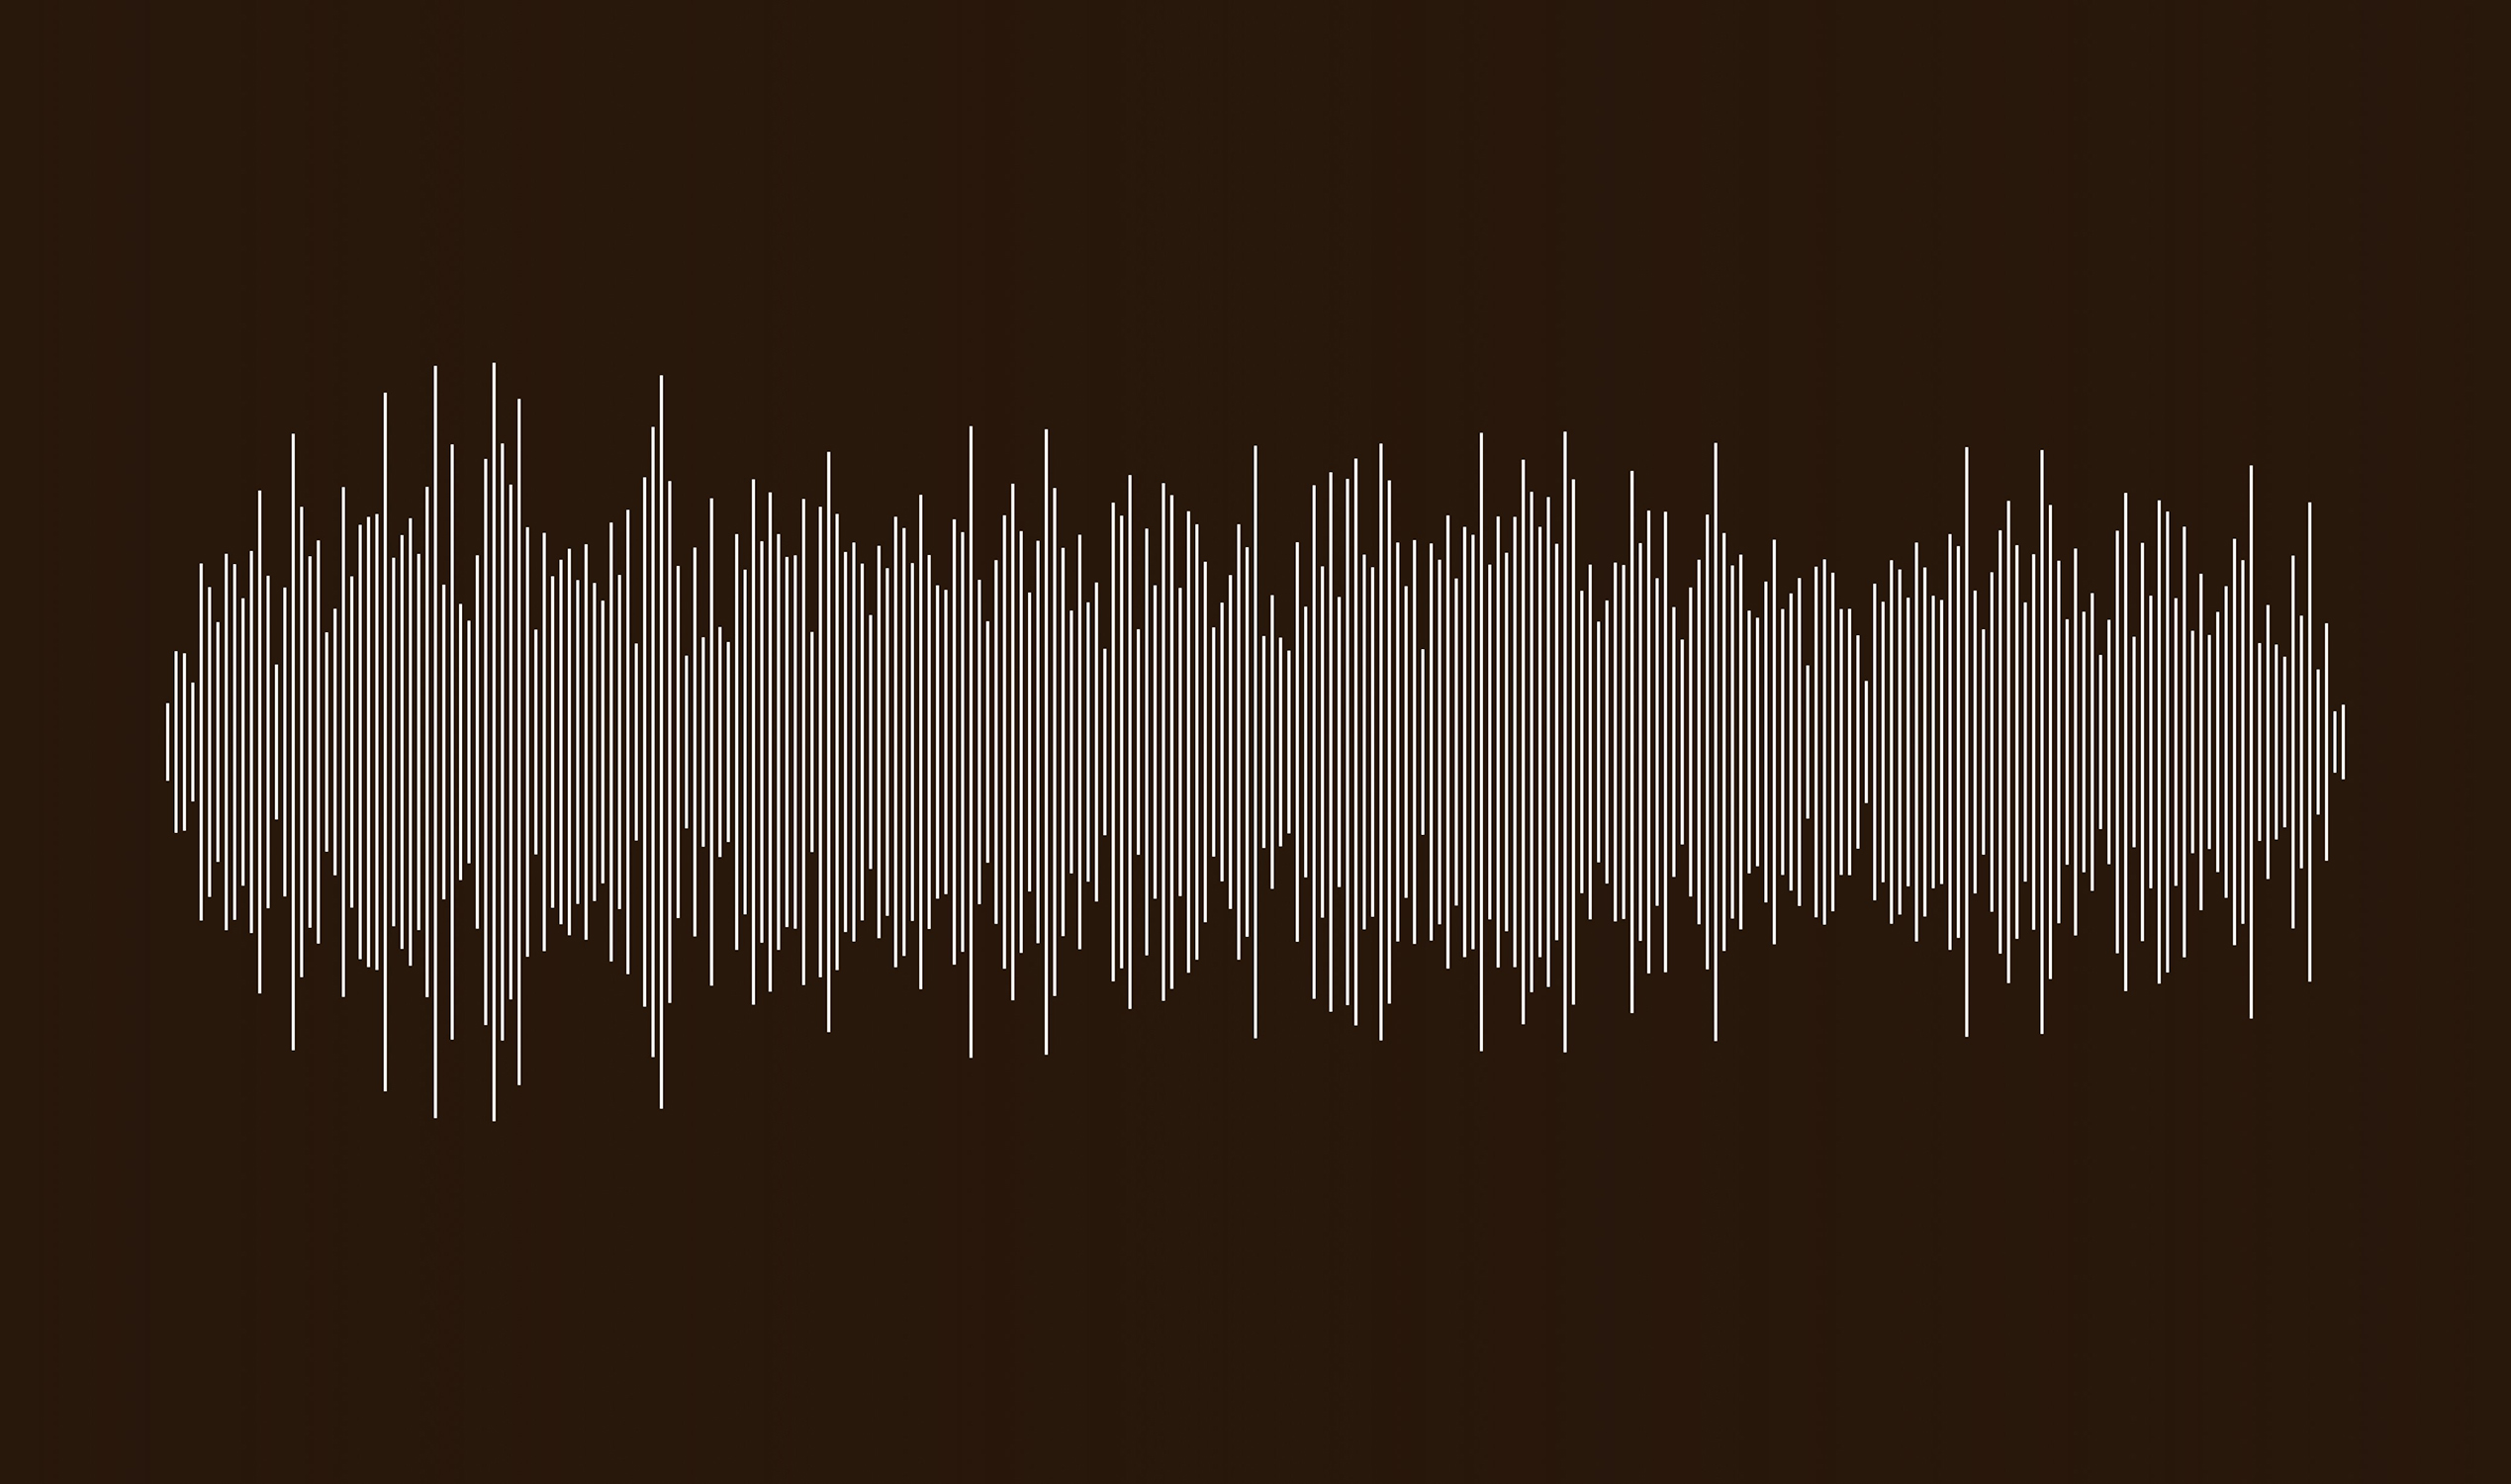 Stock illustration of sound waves in brown and white colors